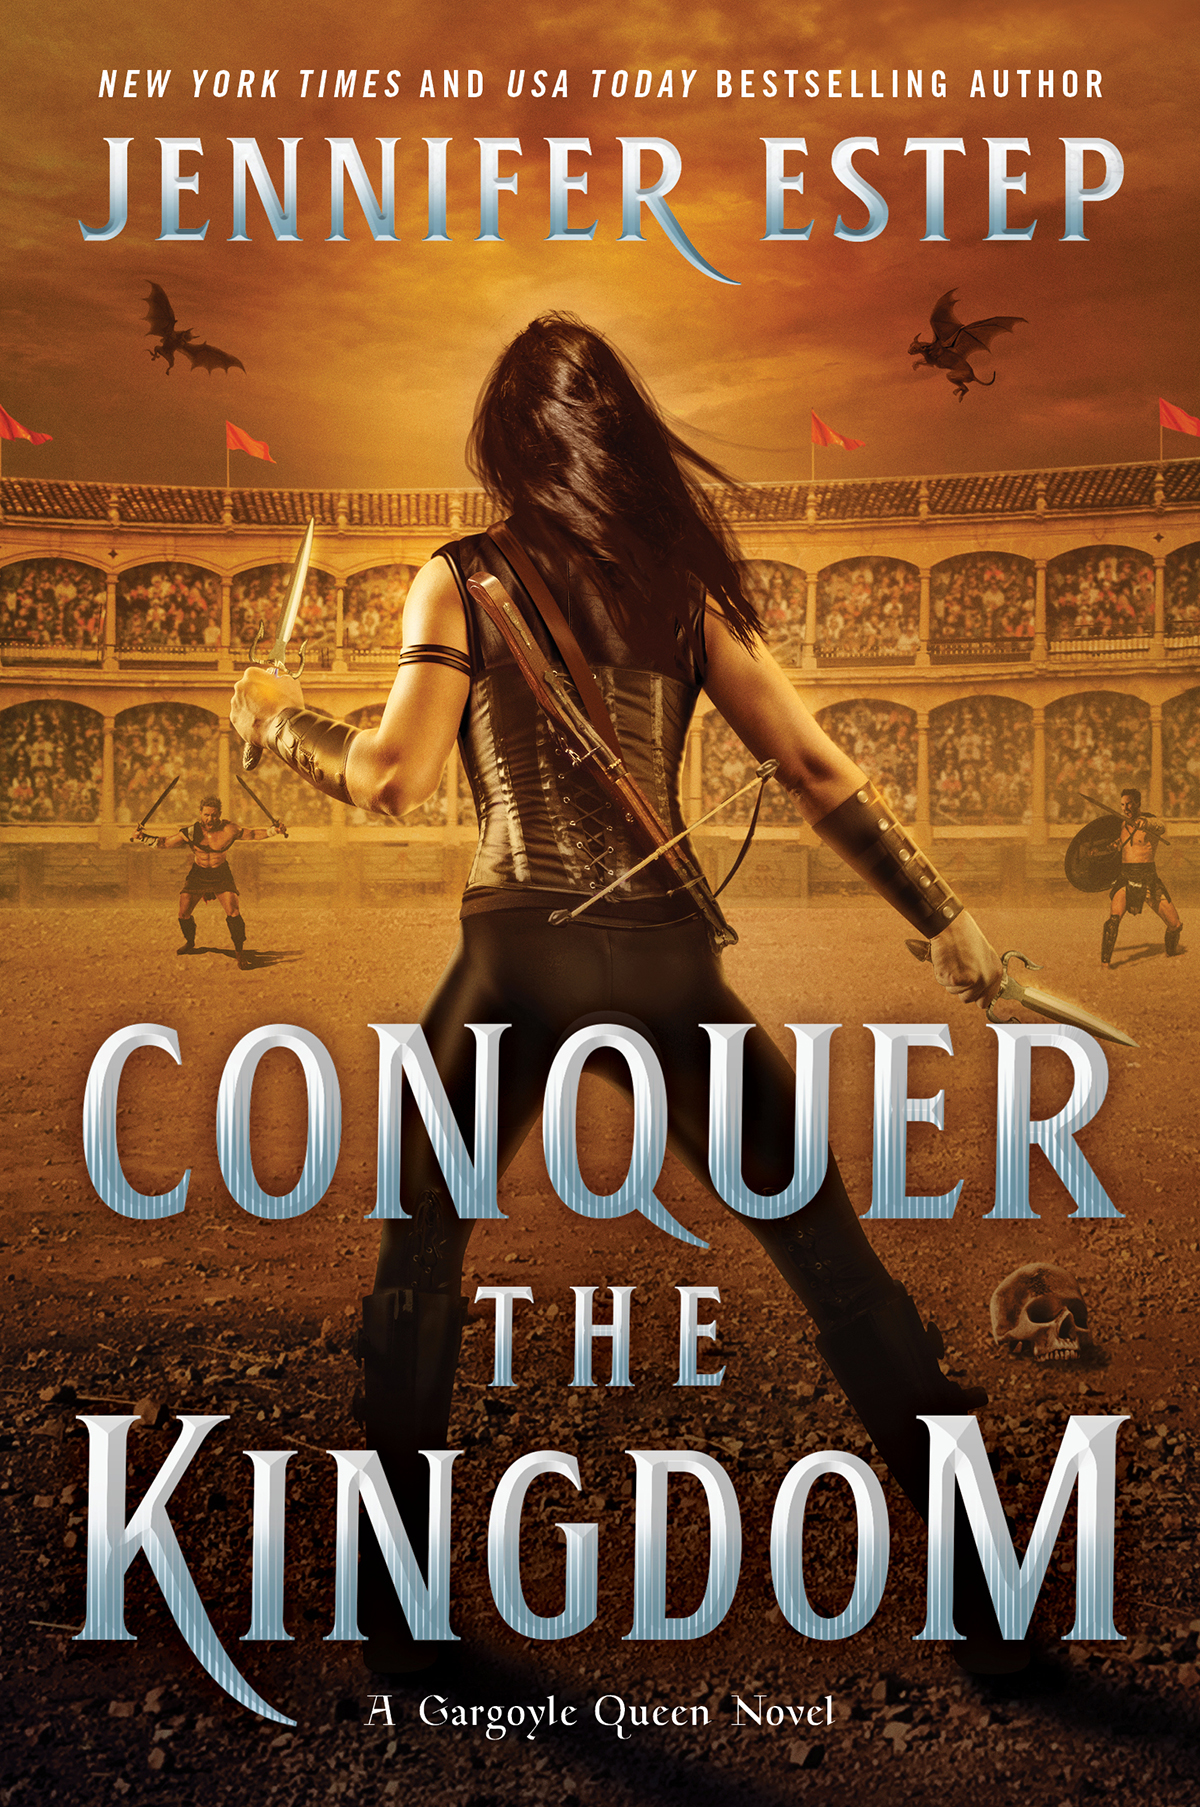 Conquer the Kingdom yellow cover art with woman fighting in an arena